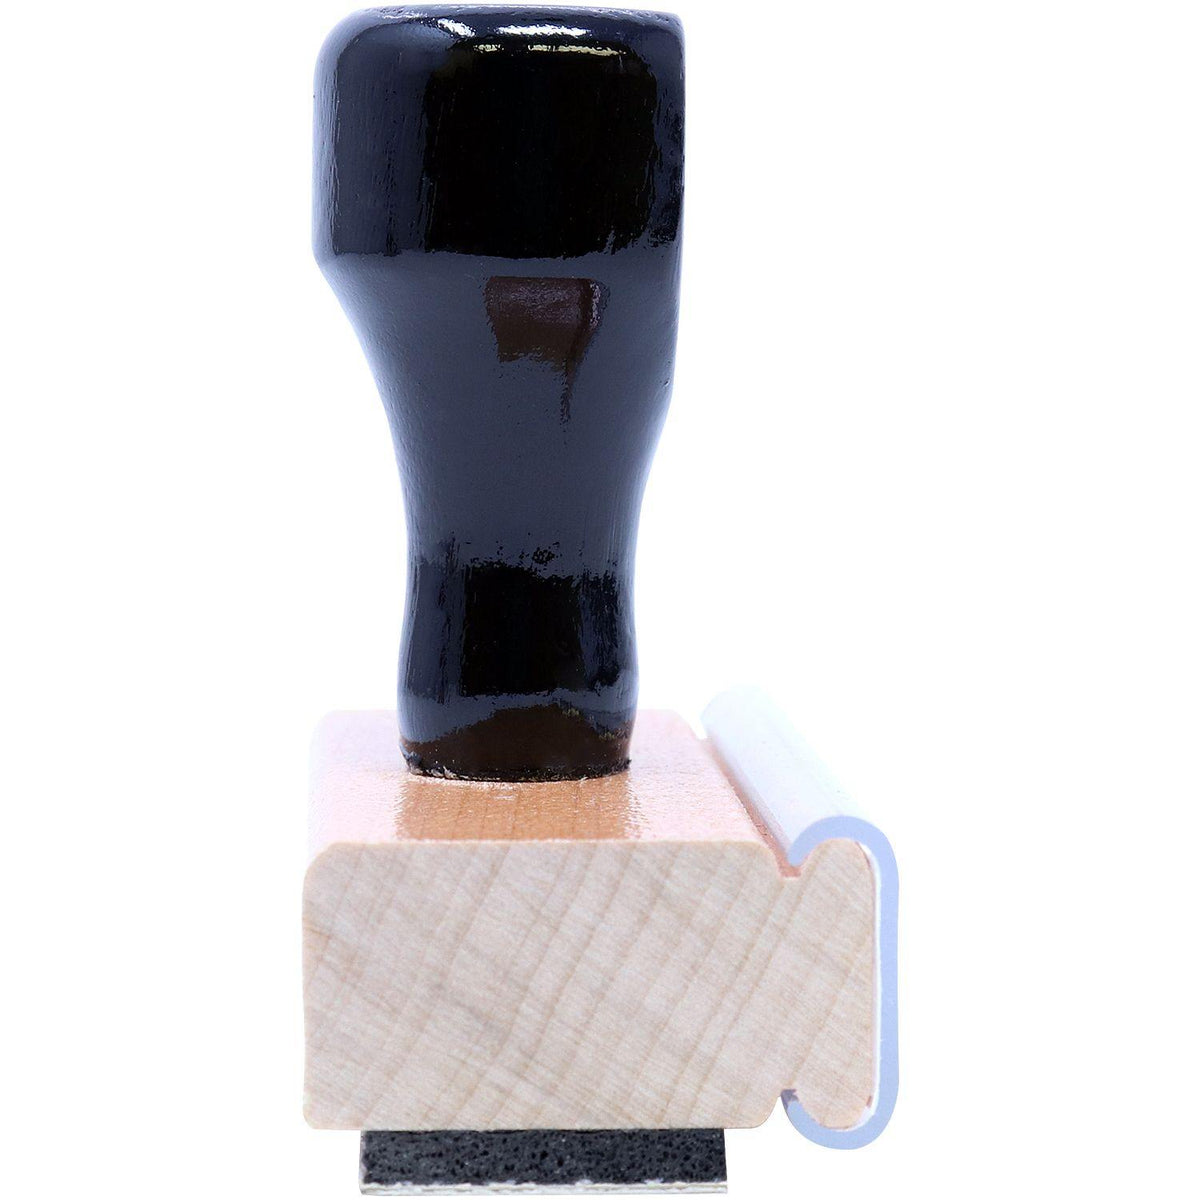 Letter Post Economy Rubber Stamp - Engineer Seal Stamps - Brand_Acorn, Impression Size_Small, Stamp Type_Regular Stamp, Type of Use_General, Type of Use_Office, Type of Use_Postal &amp; Mailing